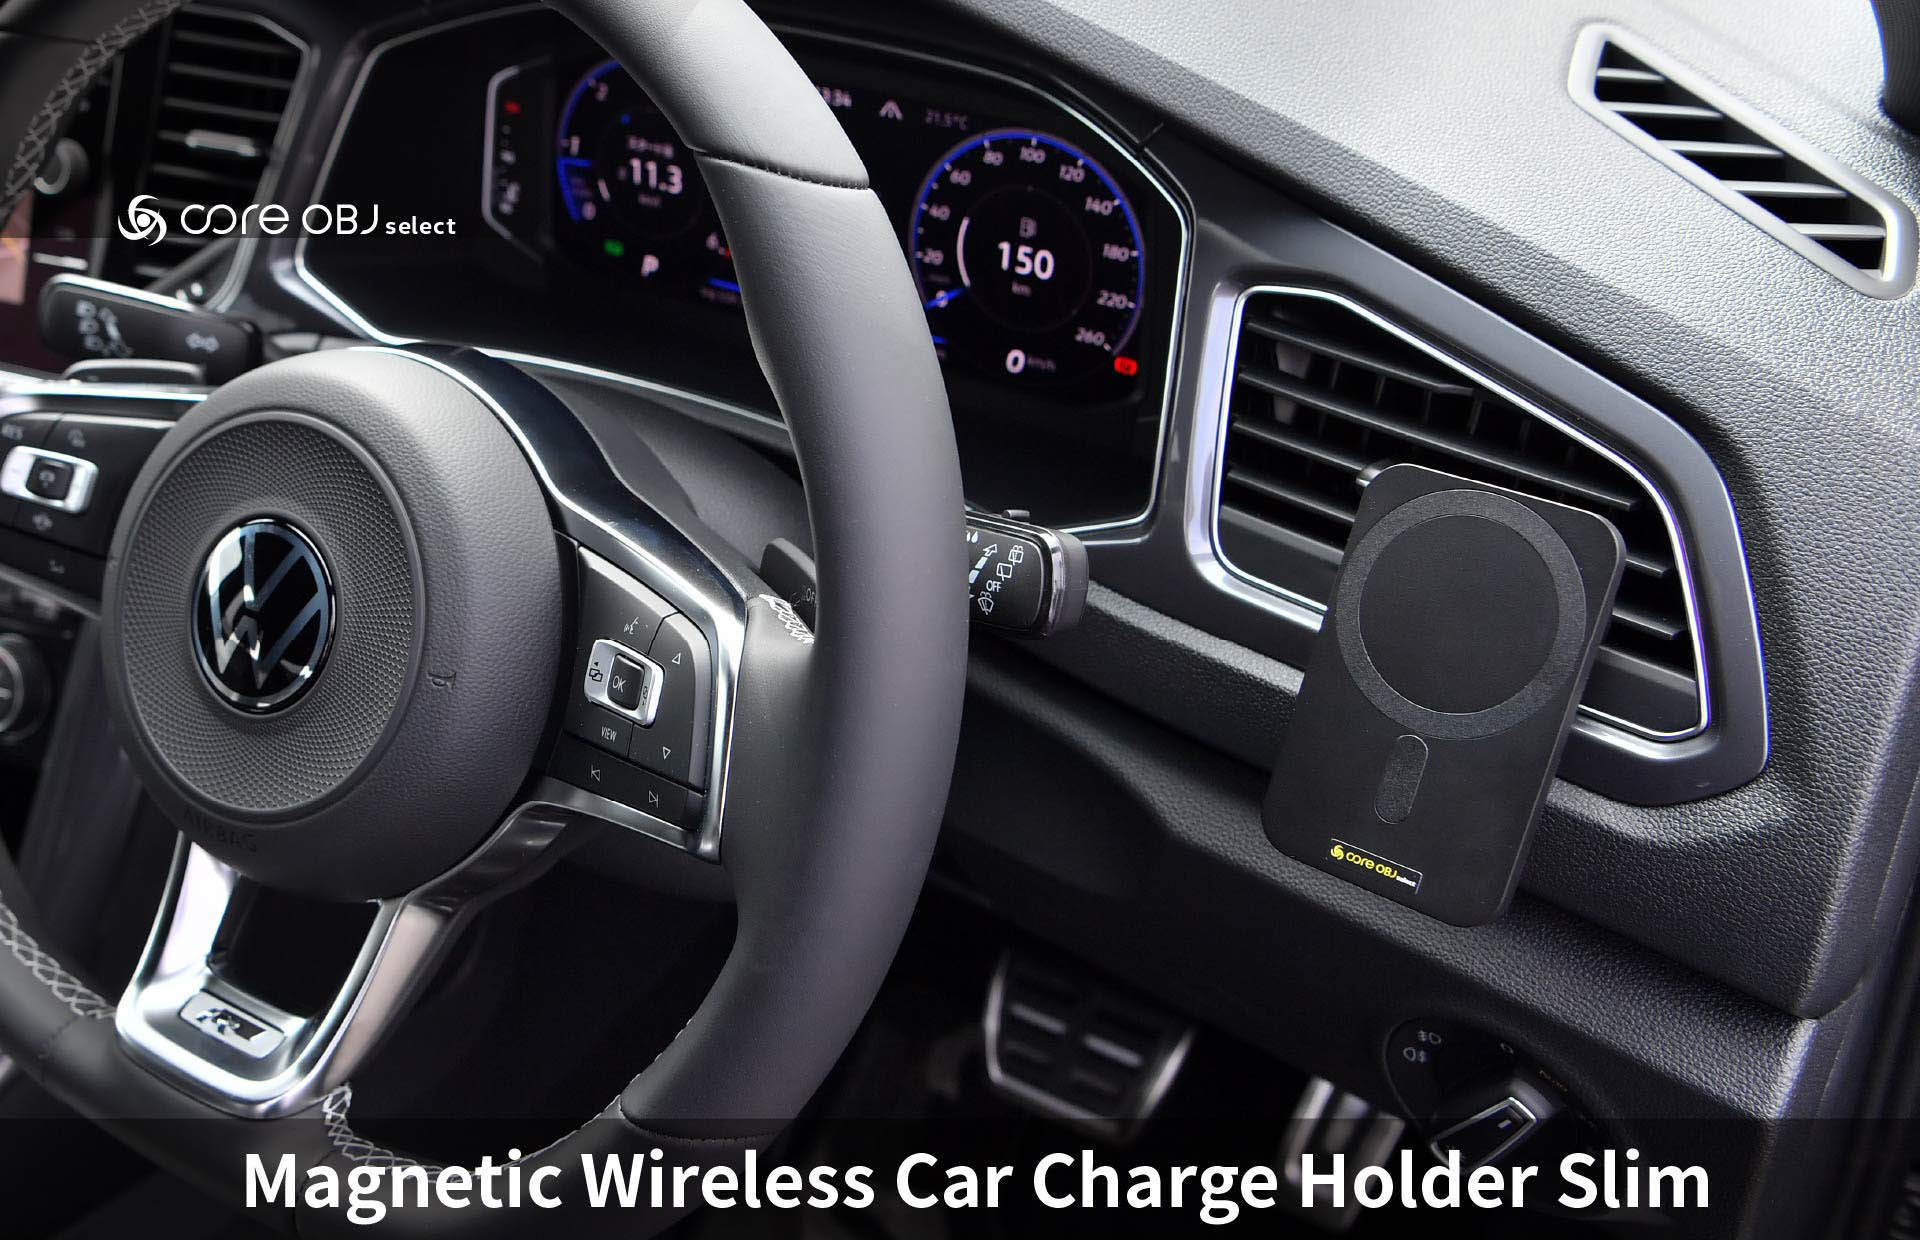 Magnetic Wireless Car Charge Holder / core obj select